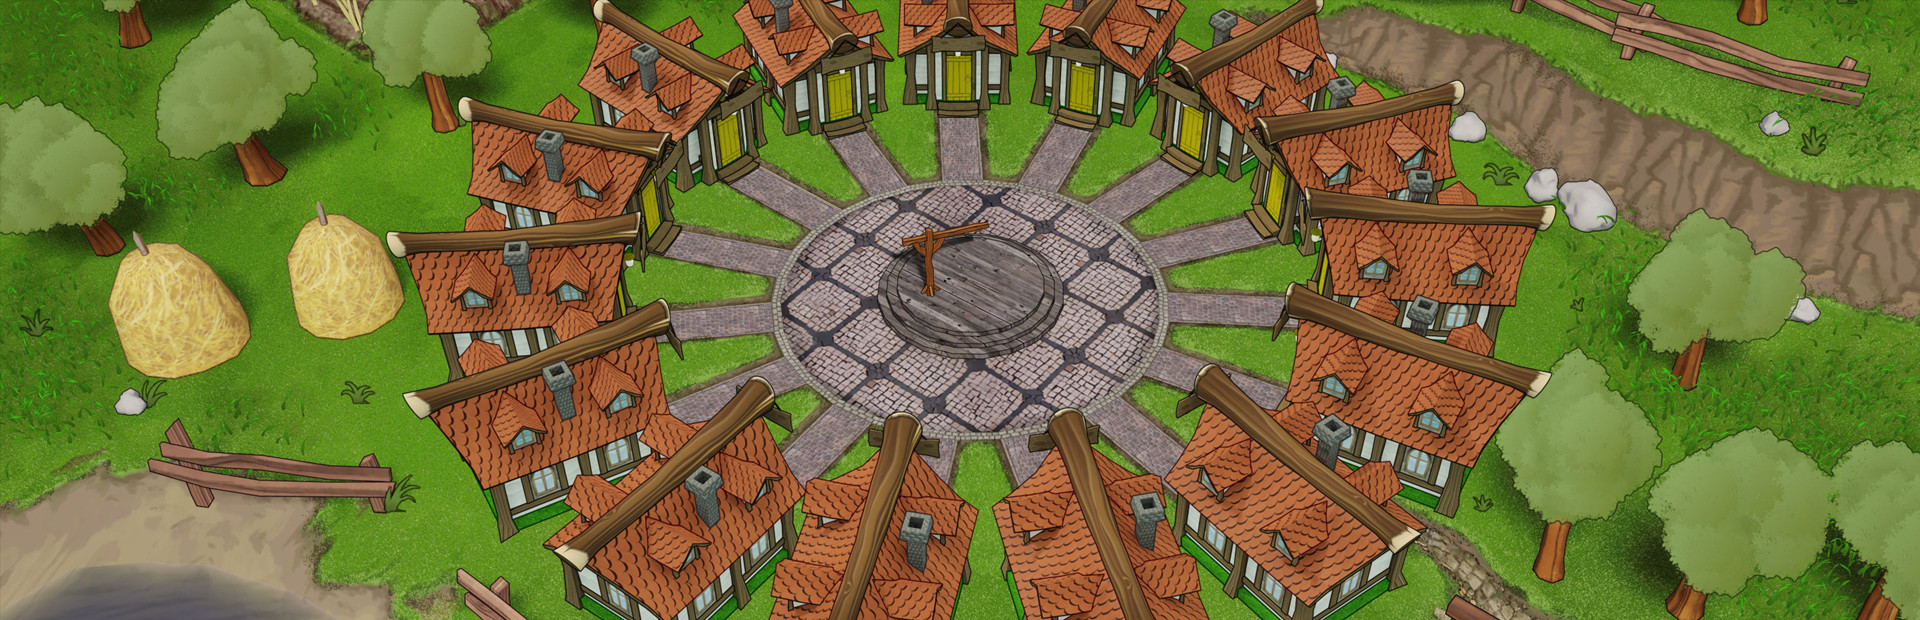 Town of Salem cover image